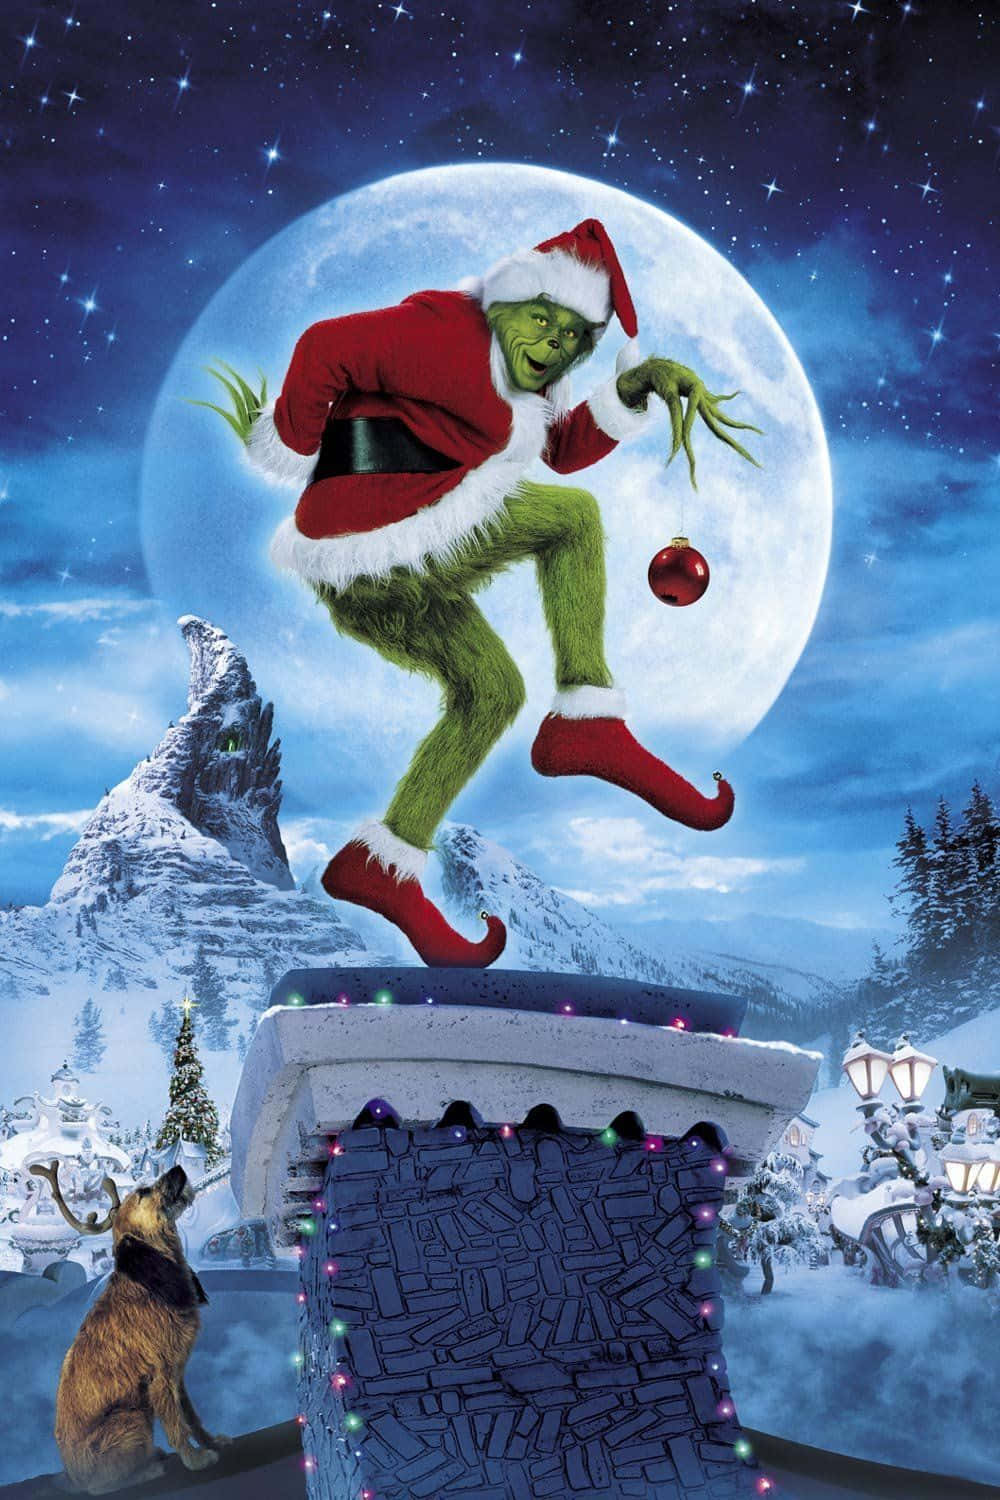 Spread Holiday Cheer With A Smirk, The Christmas Grinch Is Here! Background